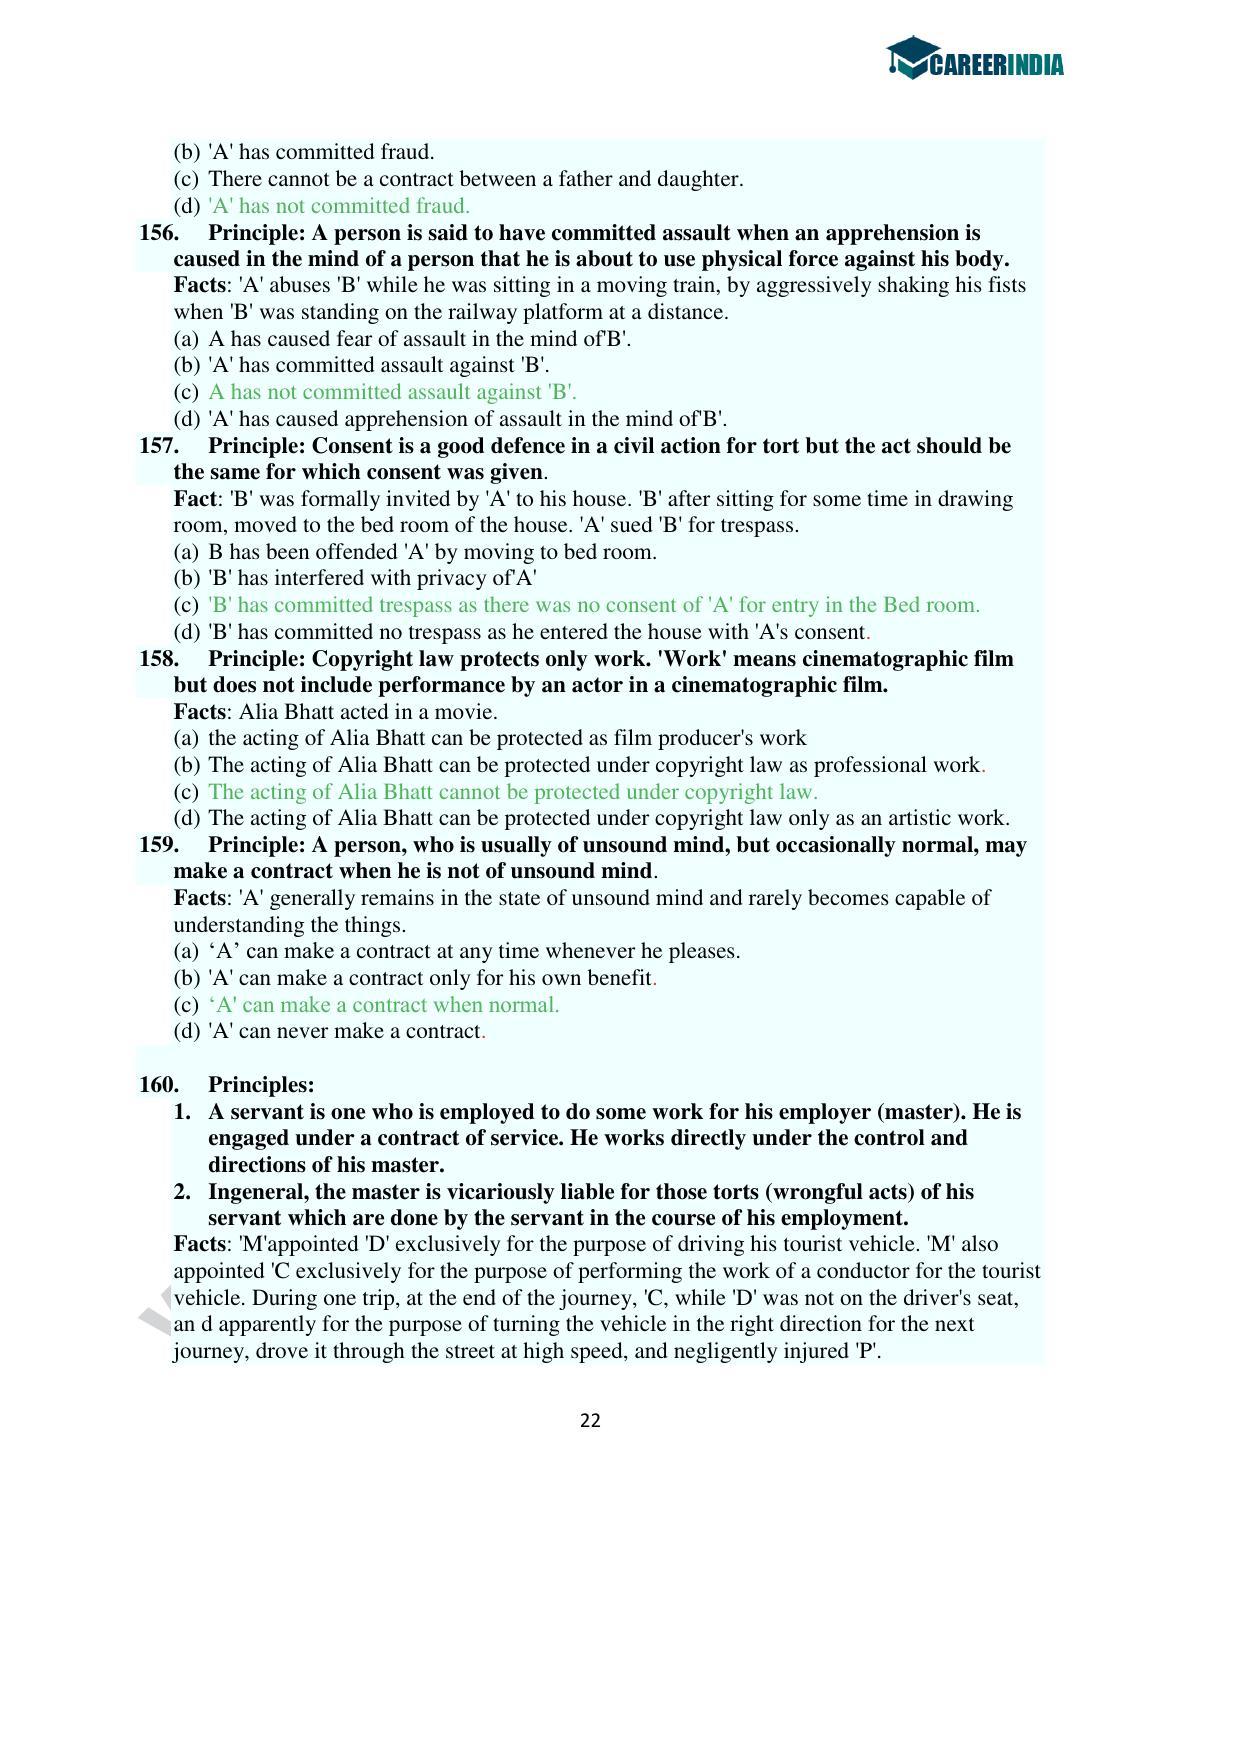 CLAT 2016 UG Question Paper with Answer Key - Page 22